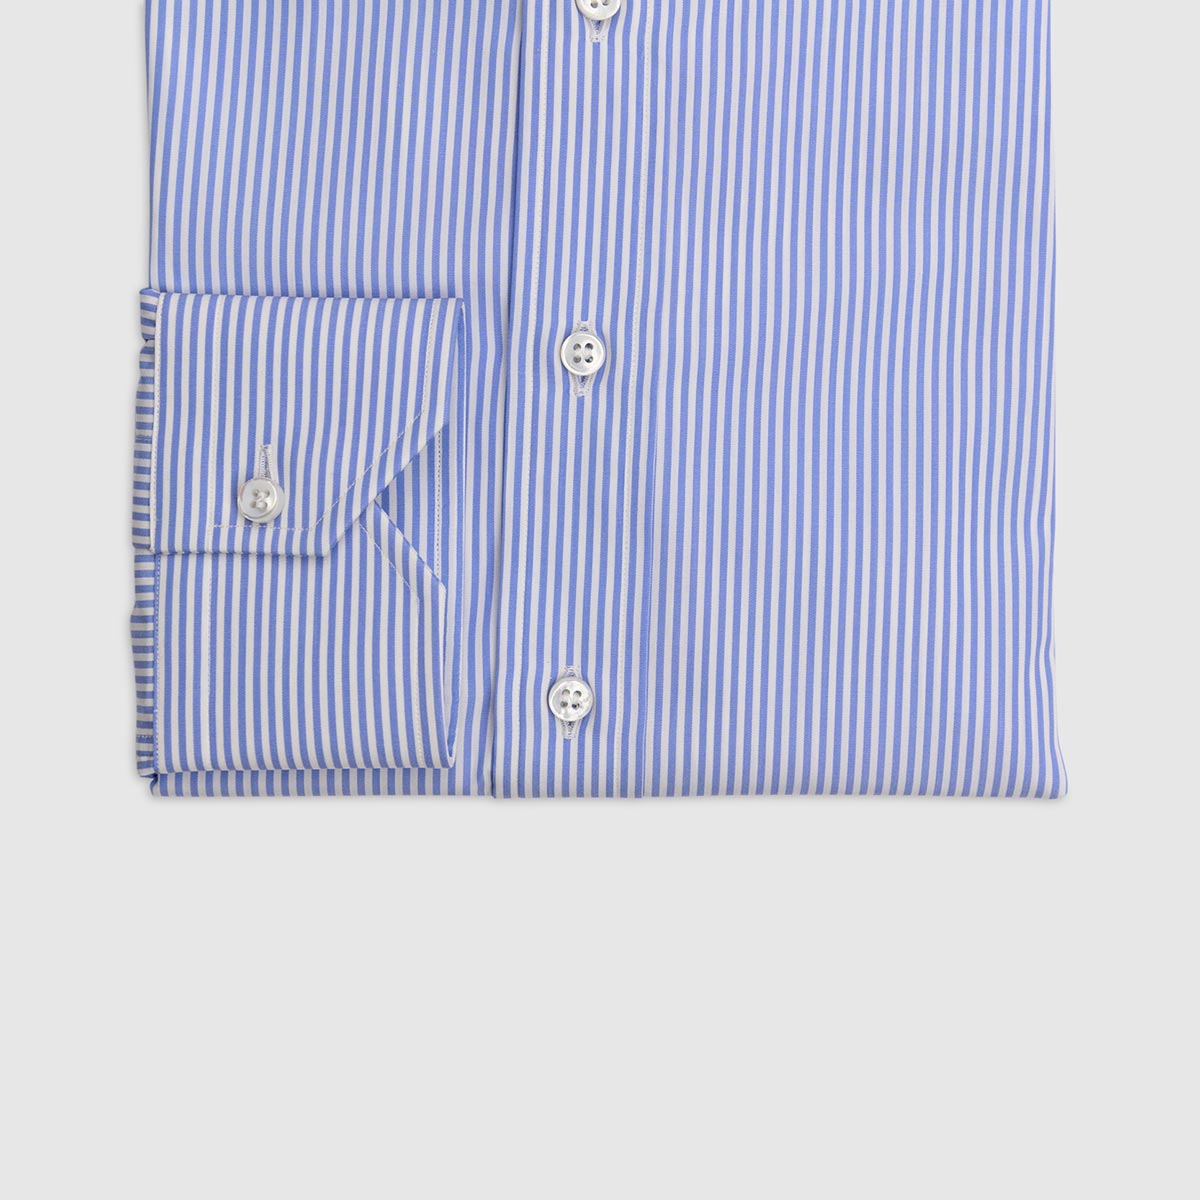 100% Double Twisted Popeline Cotton Shirt – Light Blue and White Stripes Camiceria Ambrosiana on sale 2022 2